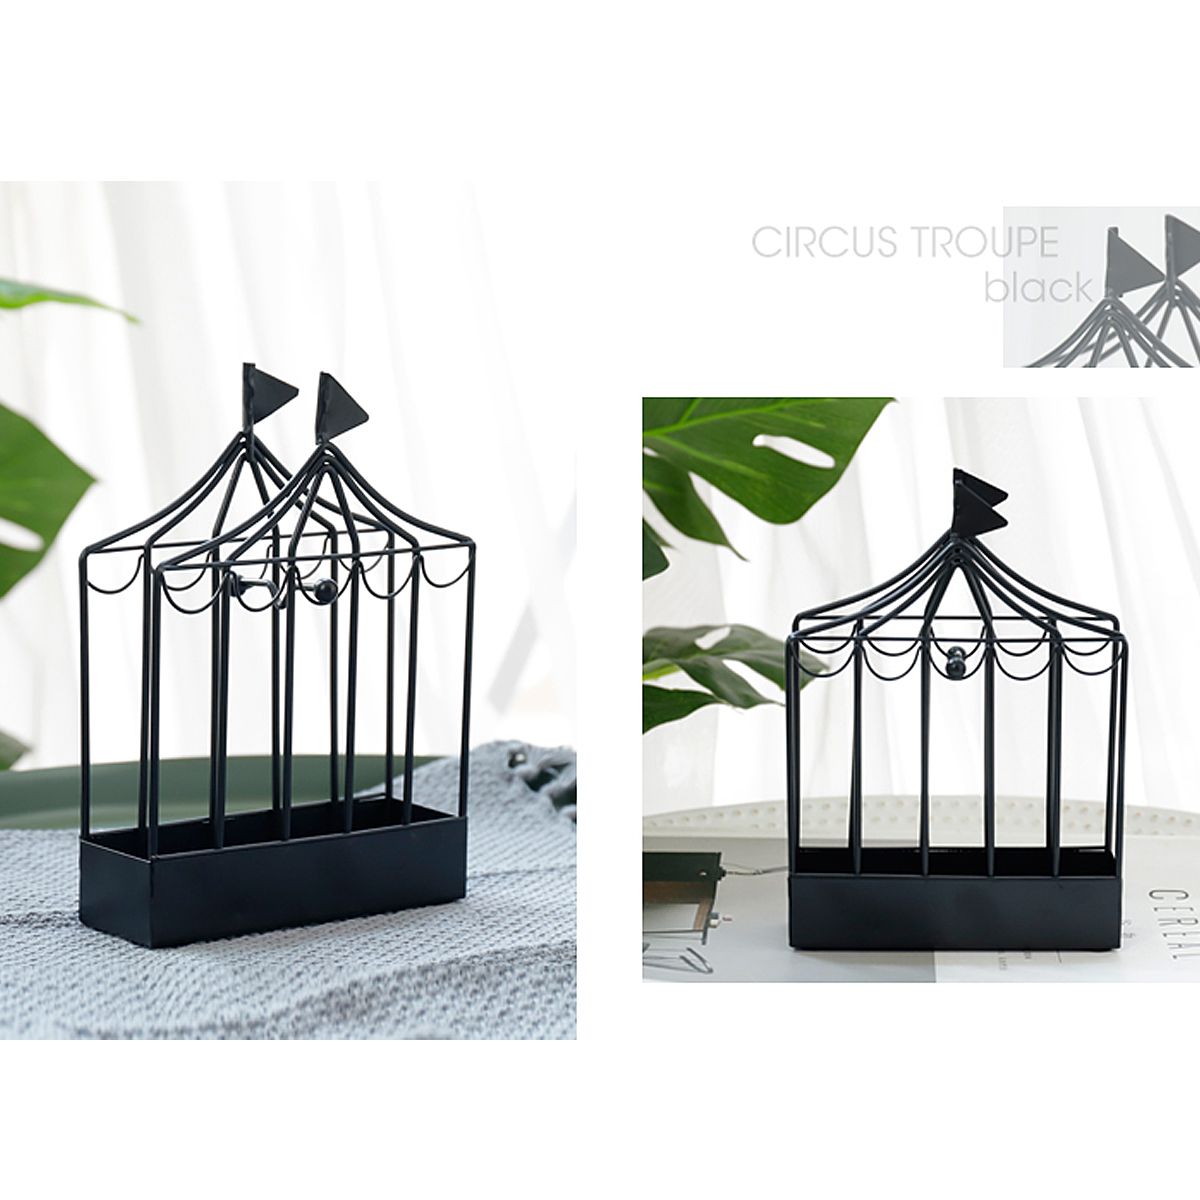 Nordic-Style-Iron-Mosquito-Coil-Holder-Vintage-Insect-Repellent-Coil-Starter-Incense-Dispeller-Rack-1329400